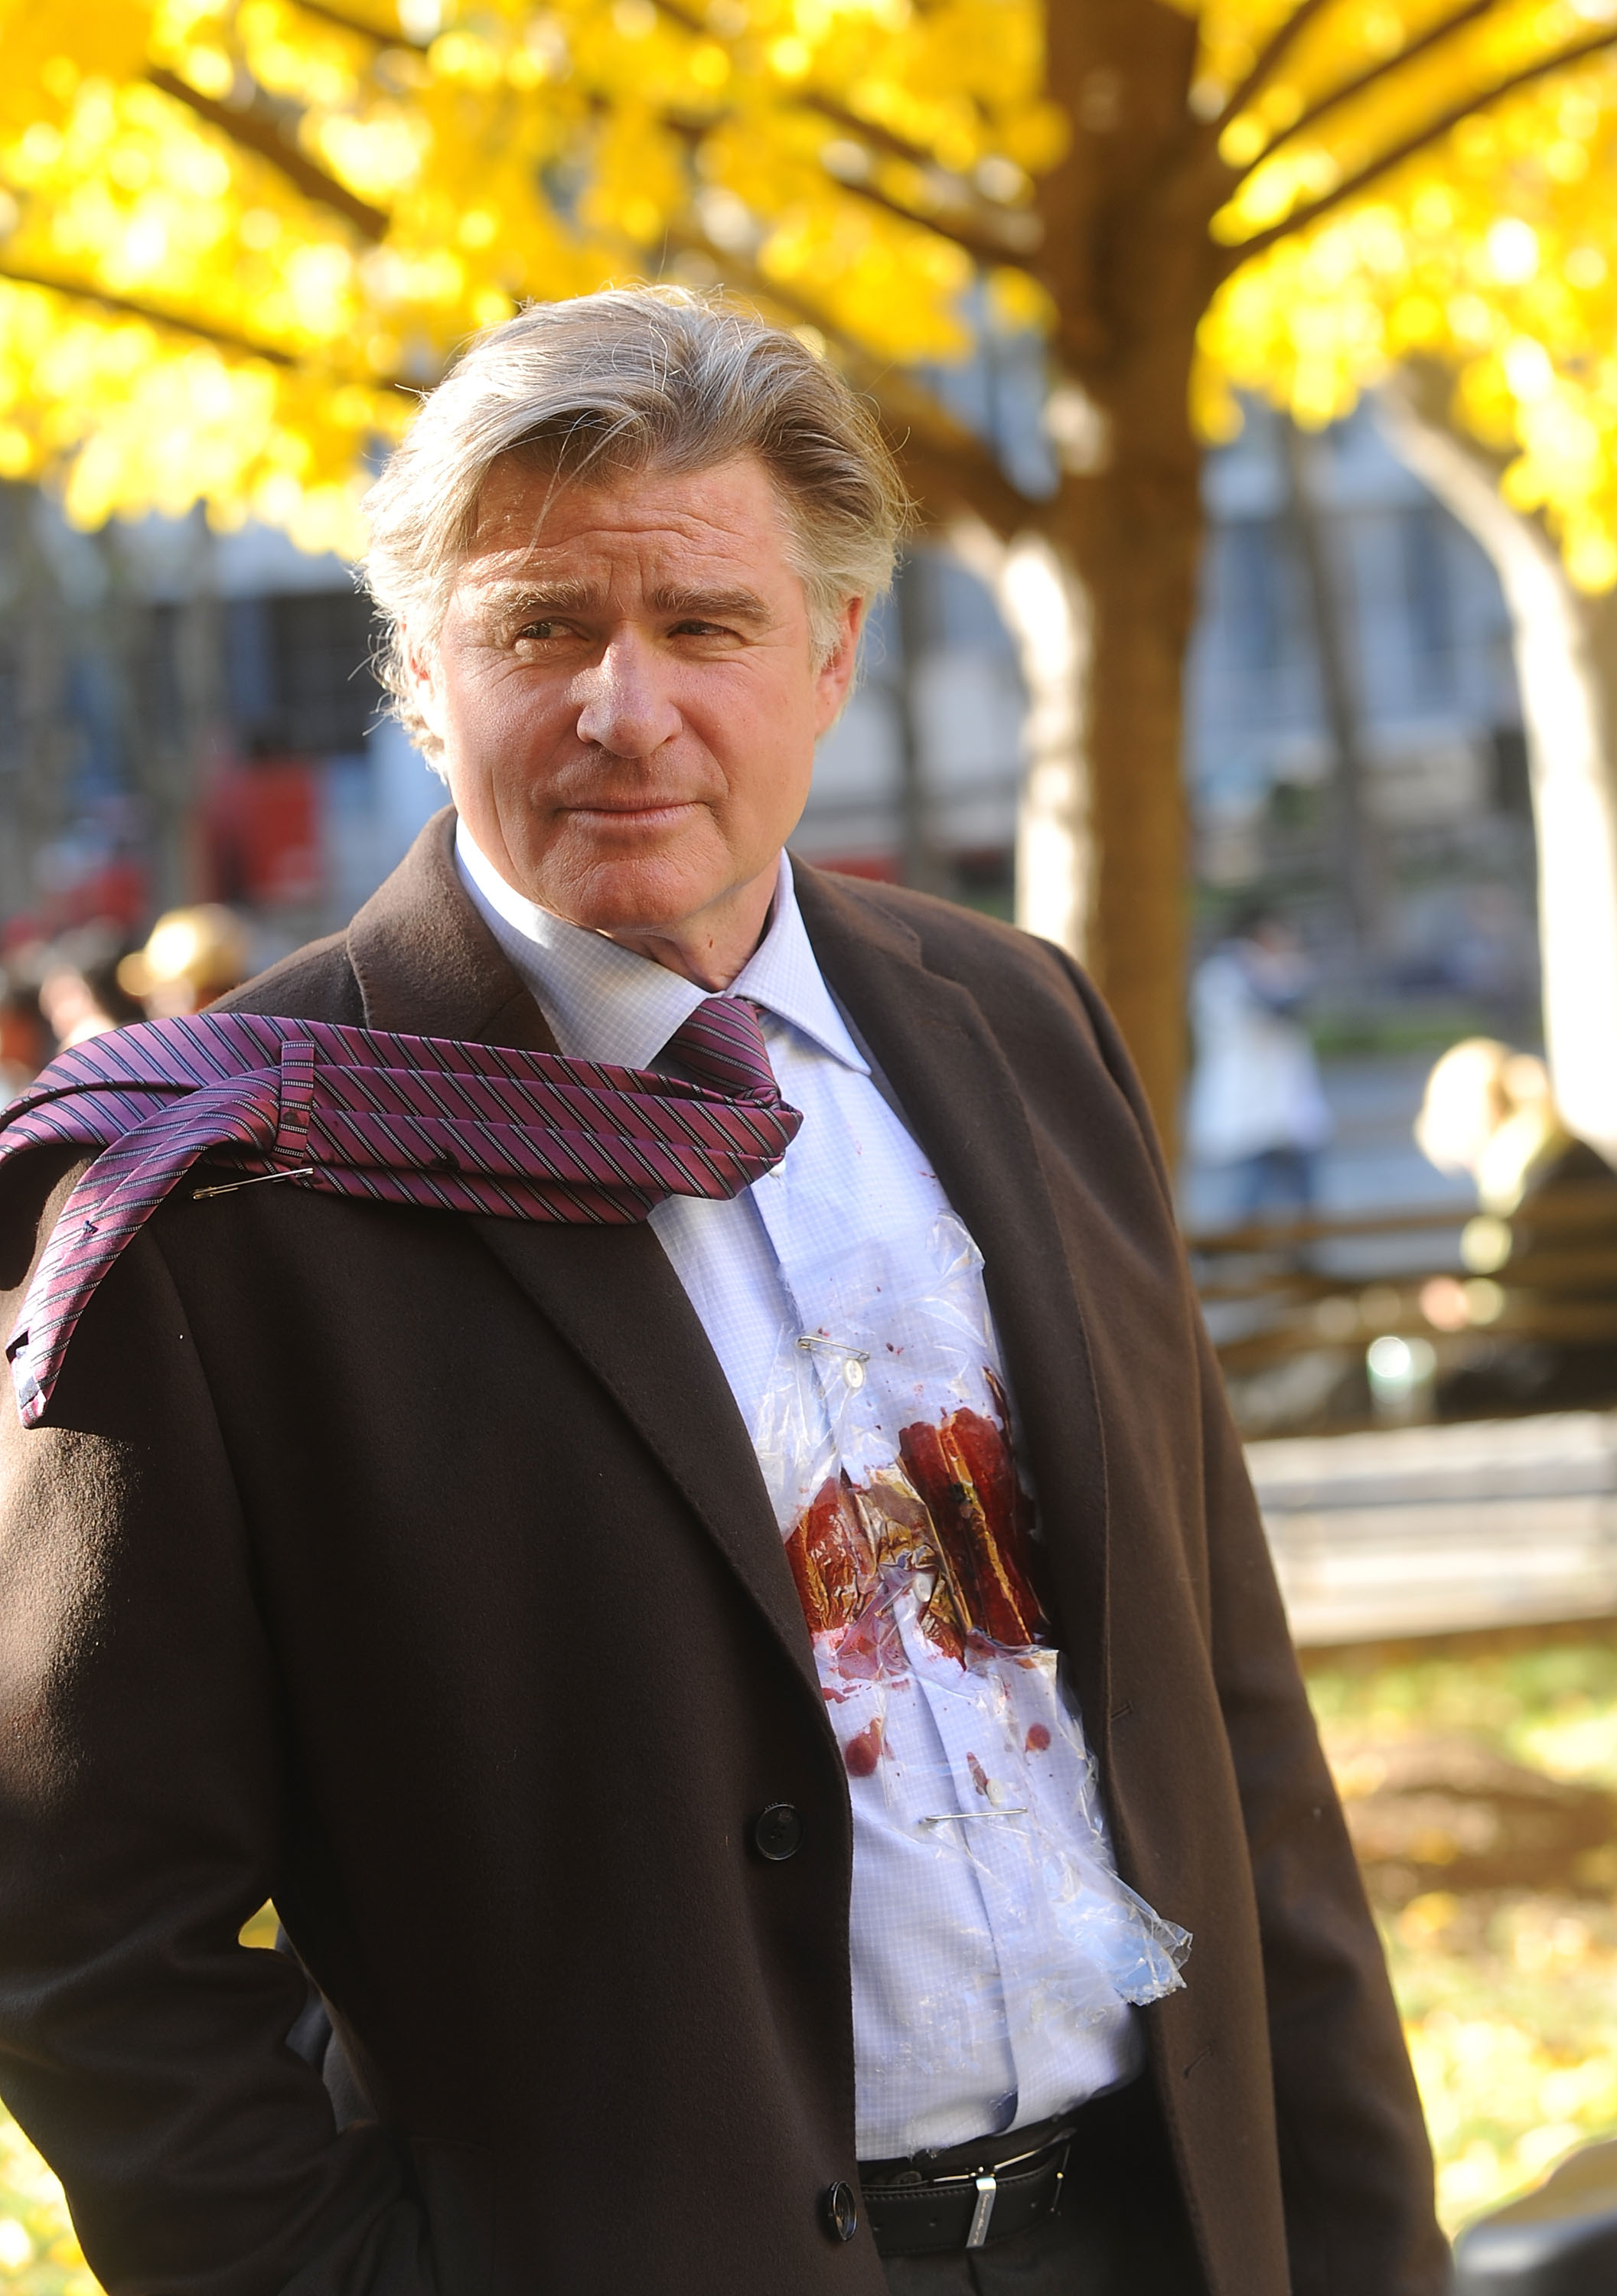 Treat Williams on the set of "Law & Order SVU" on November 9, 2011 | Source: Getty Images